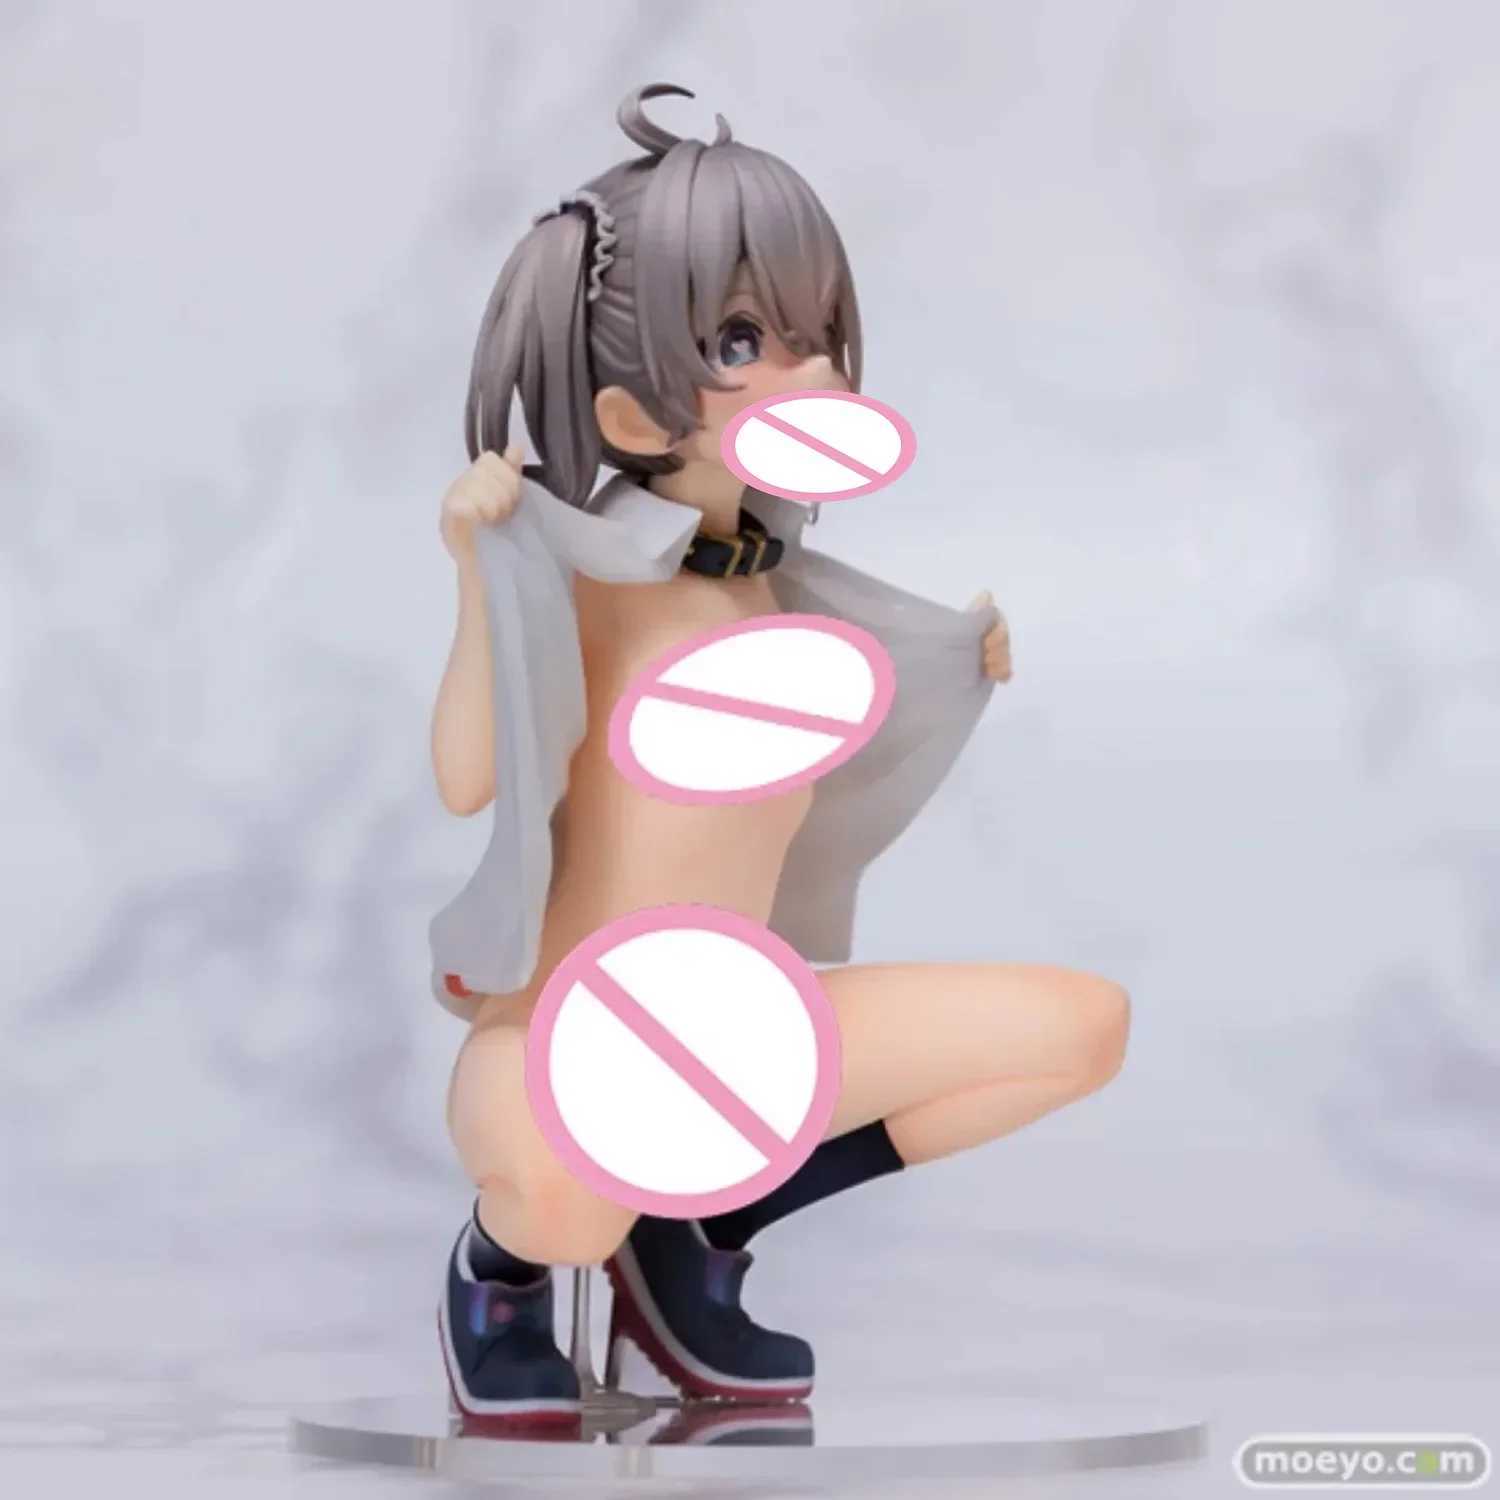 Comics Heroes 13cm NSFW Insight Nikukan SXEY Nude Girl PVC Action Action figure Toy Adults Collection Statue Hentai Model Doll Gifts 240413